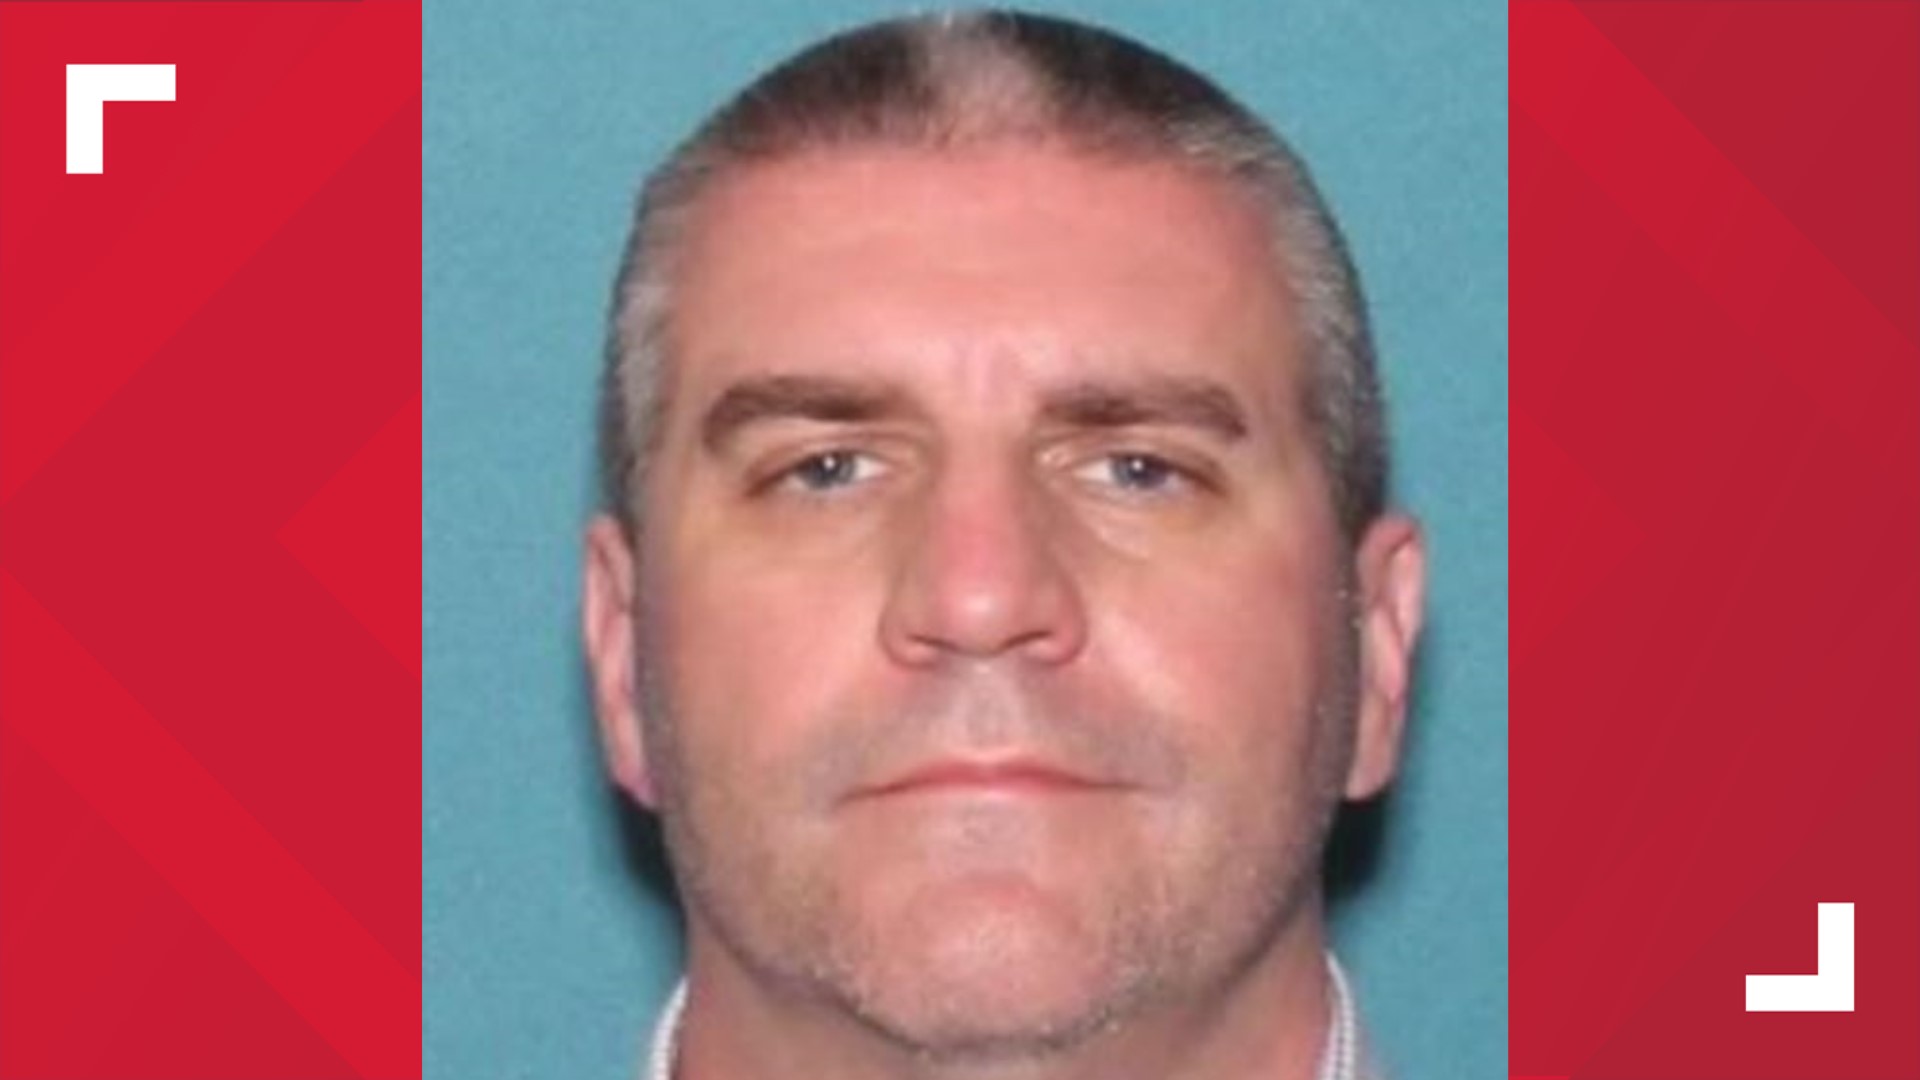 51-year-old William Jack Berg is charged with Wire Fraud and Money Laundering.